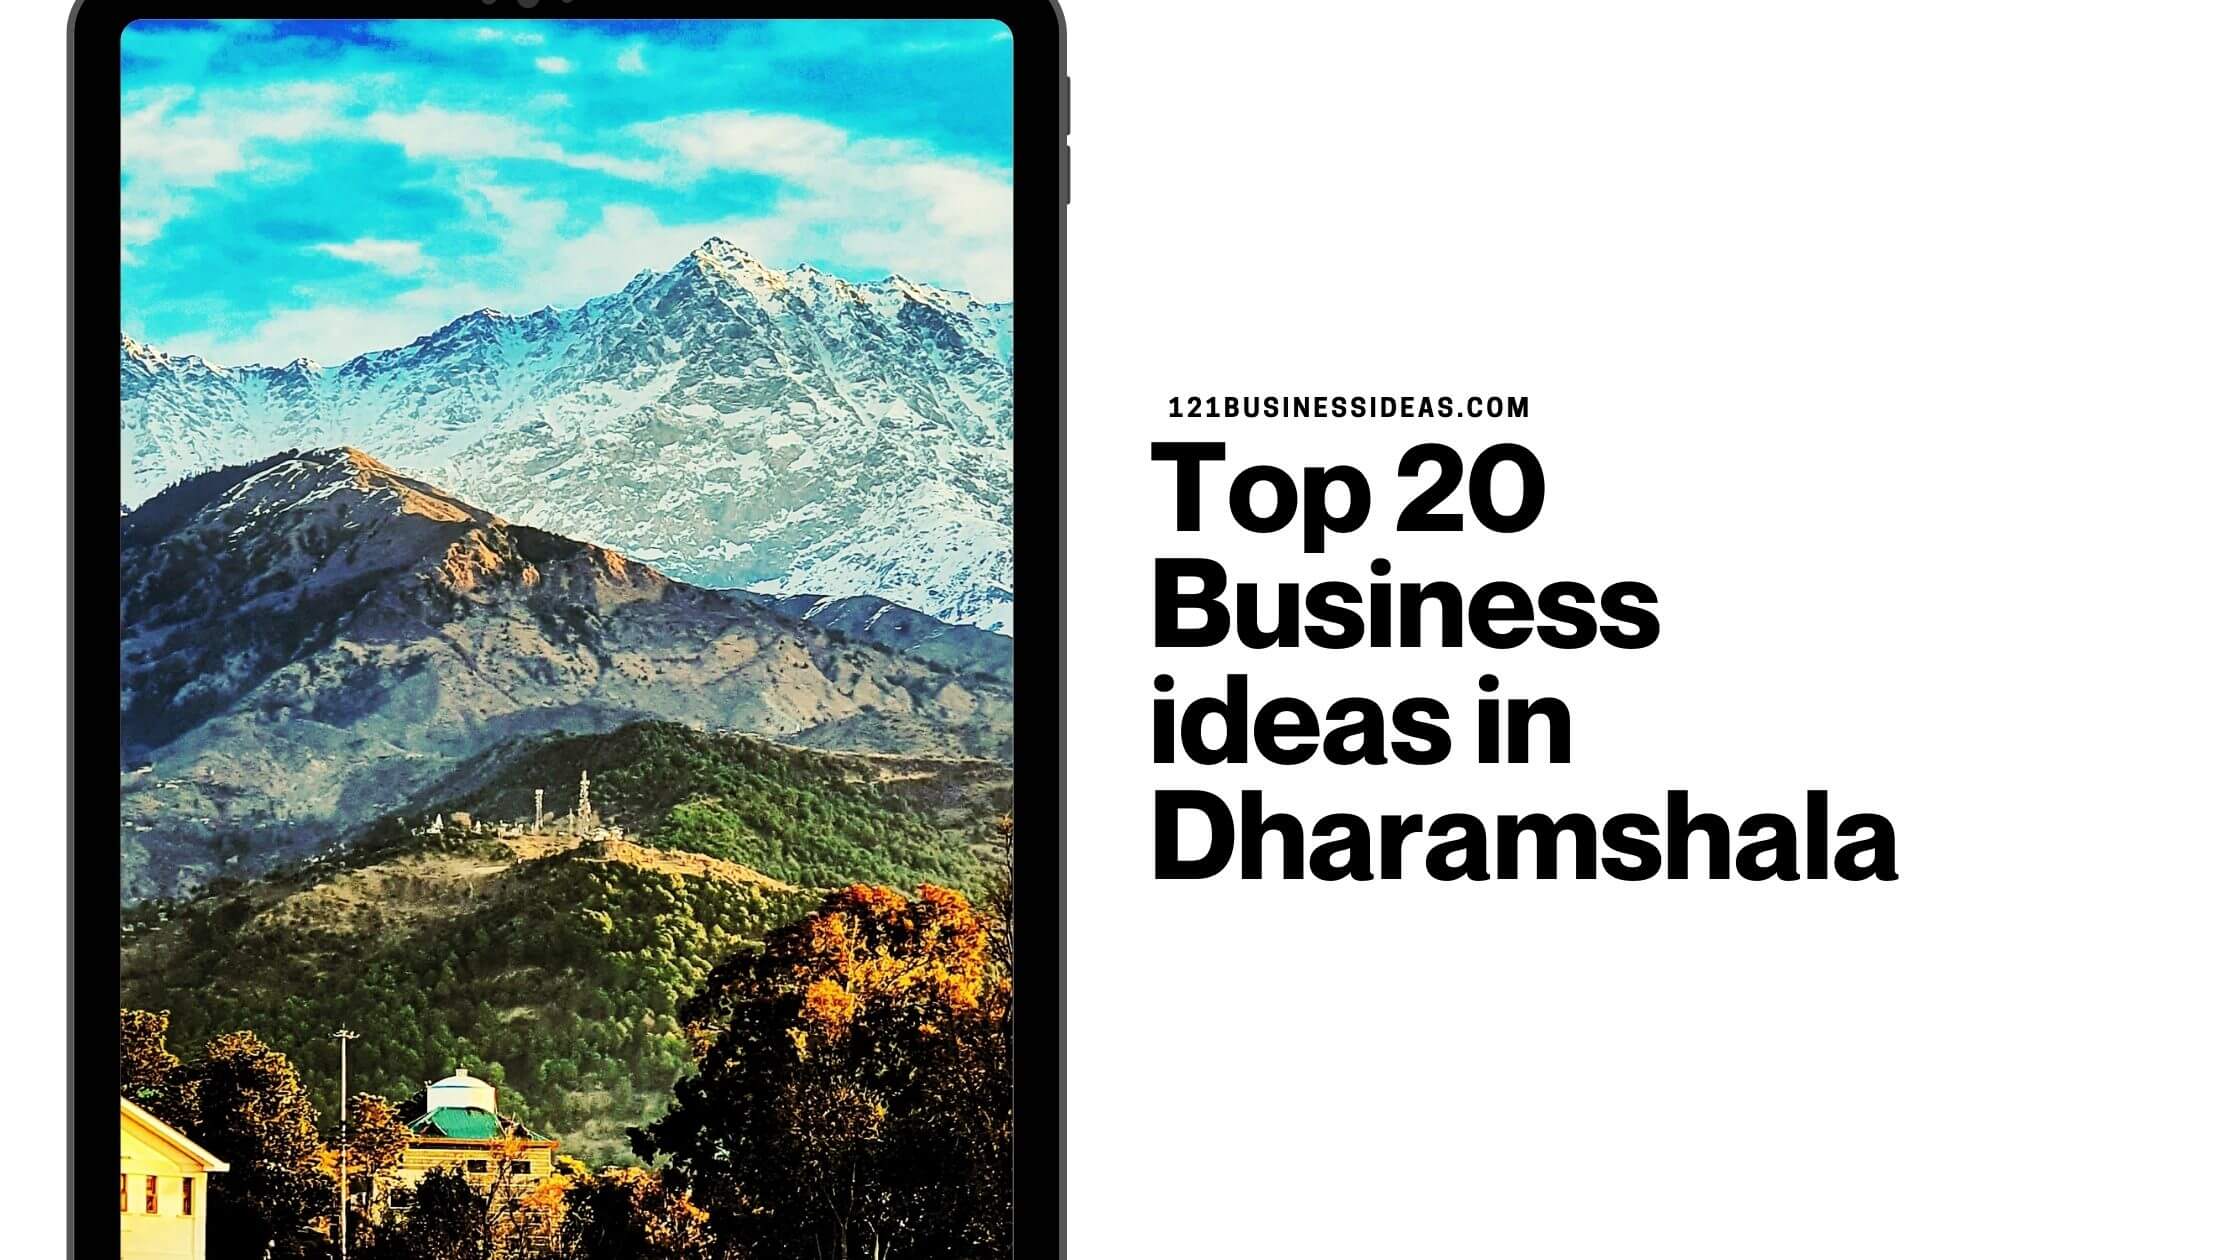 Top 20 Business ideas in Dharamshala (1)